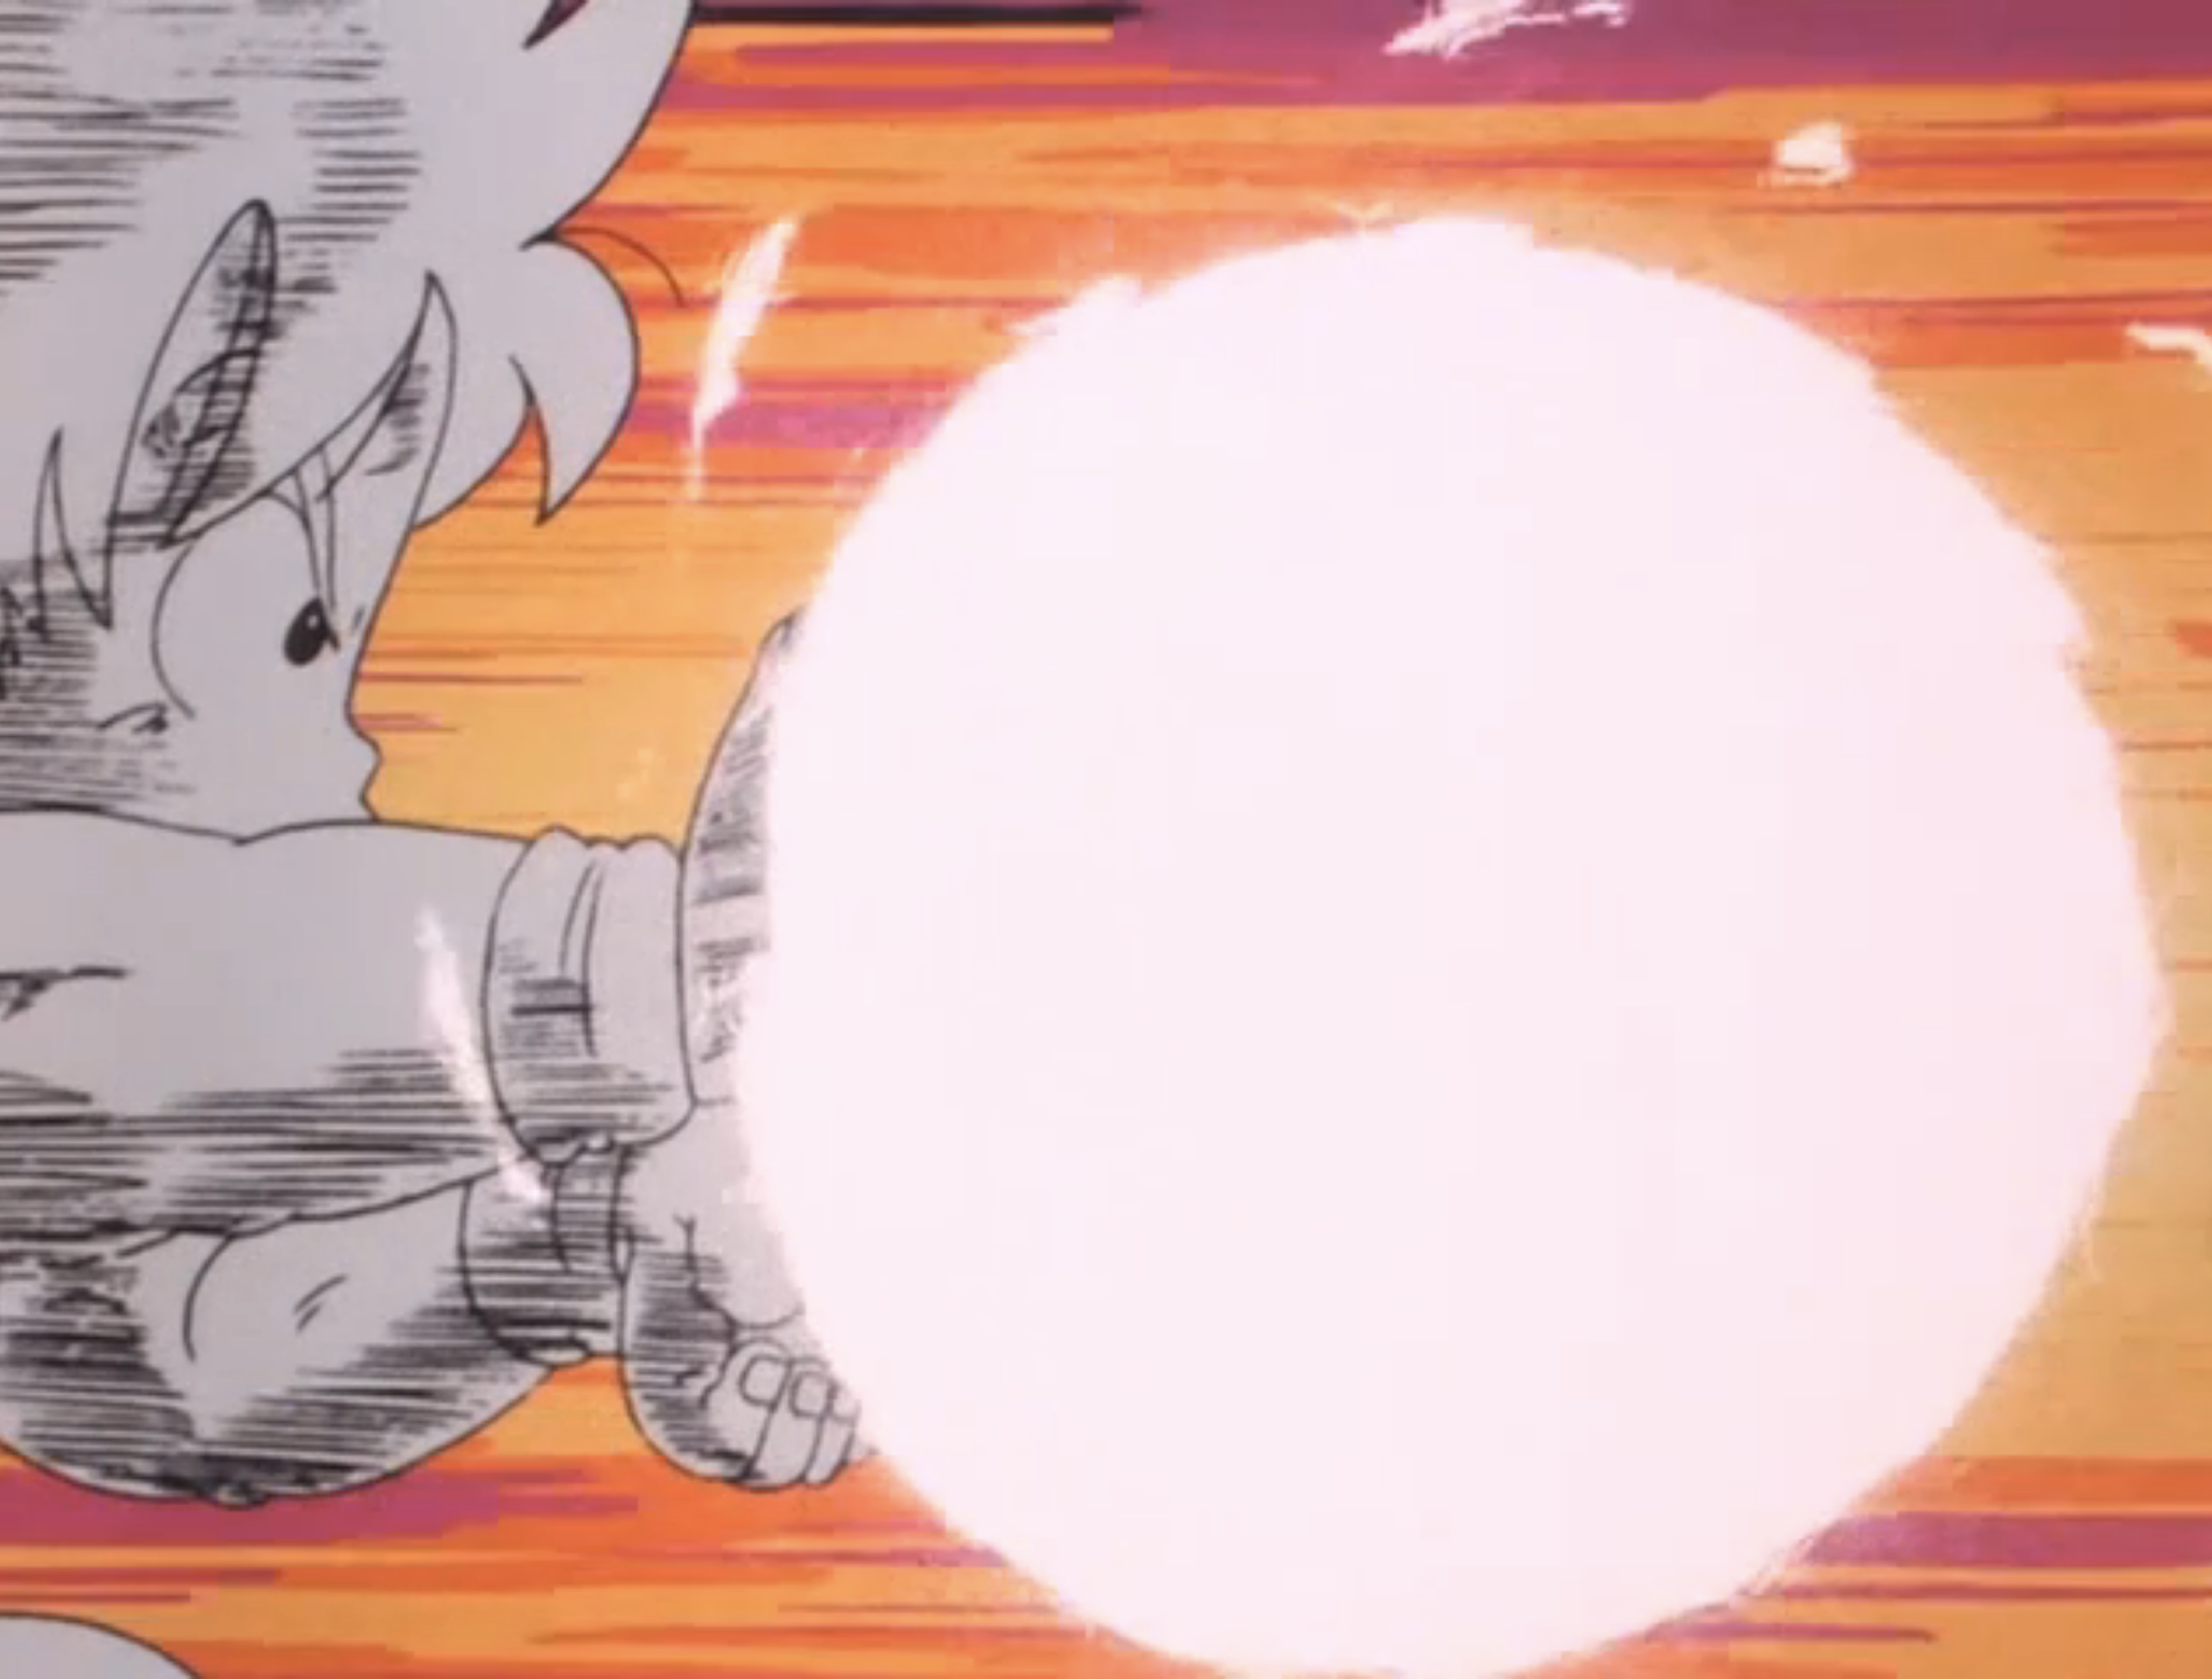 an image of Goku doing his first kamehameha in the dragon ball anime. the attack shines a bright white light as Goku fires out a laser from his hands. 